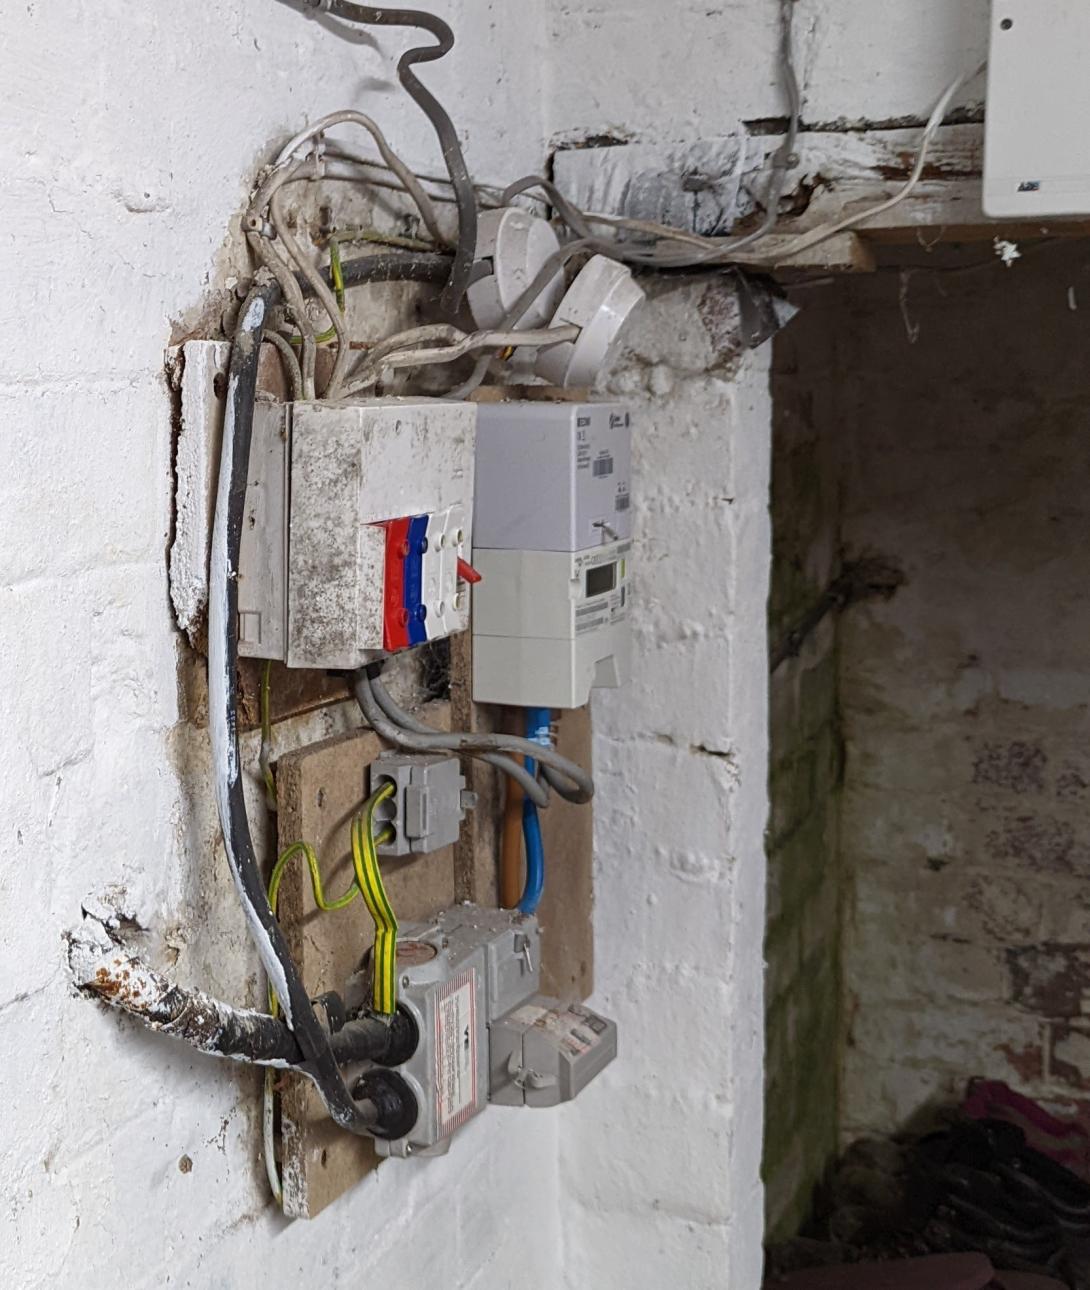 Dangerous Old fuse board in cellar with junction box and old wiring with no RCD protection